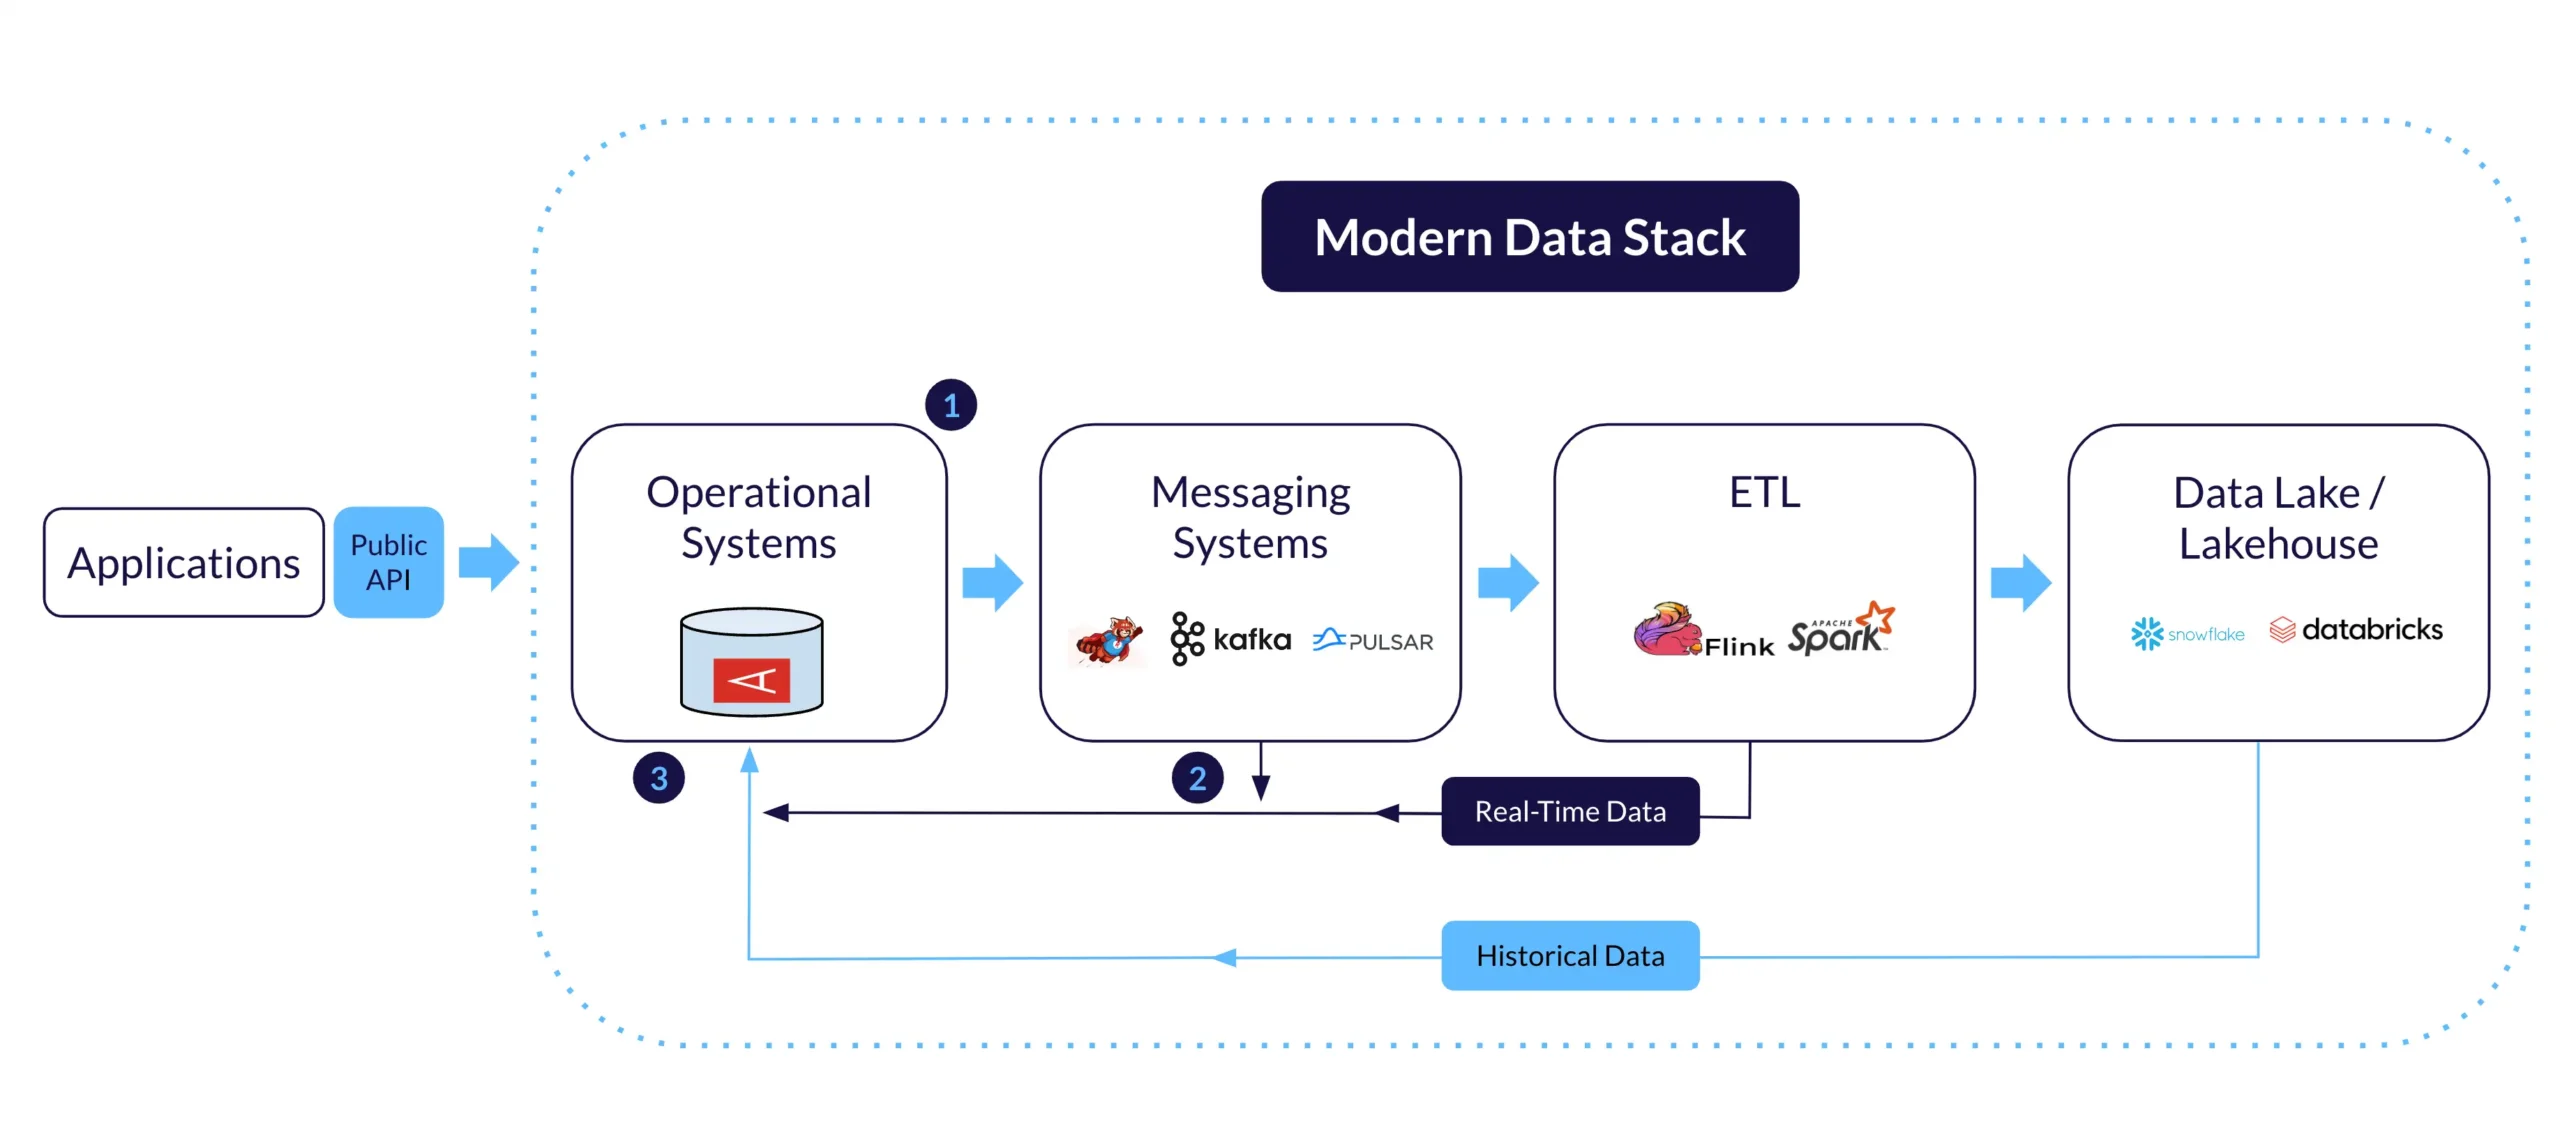 Aerospike and streaming in the modern data stack